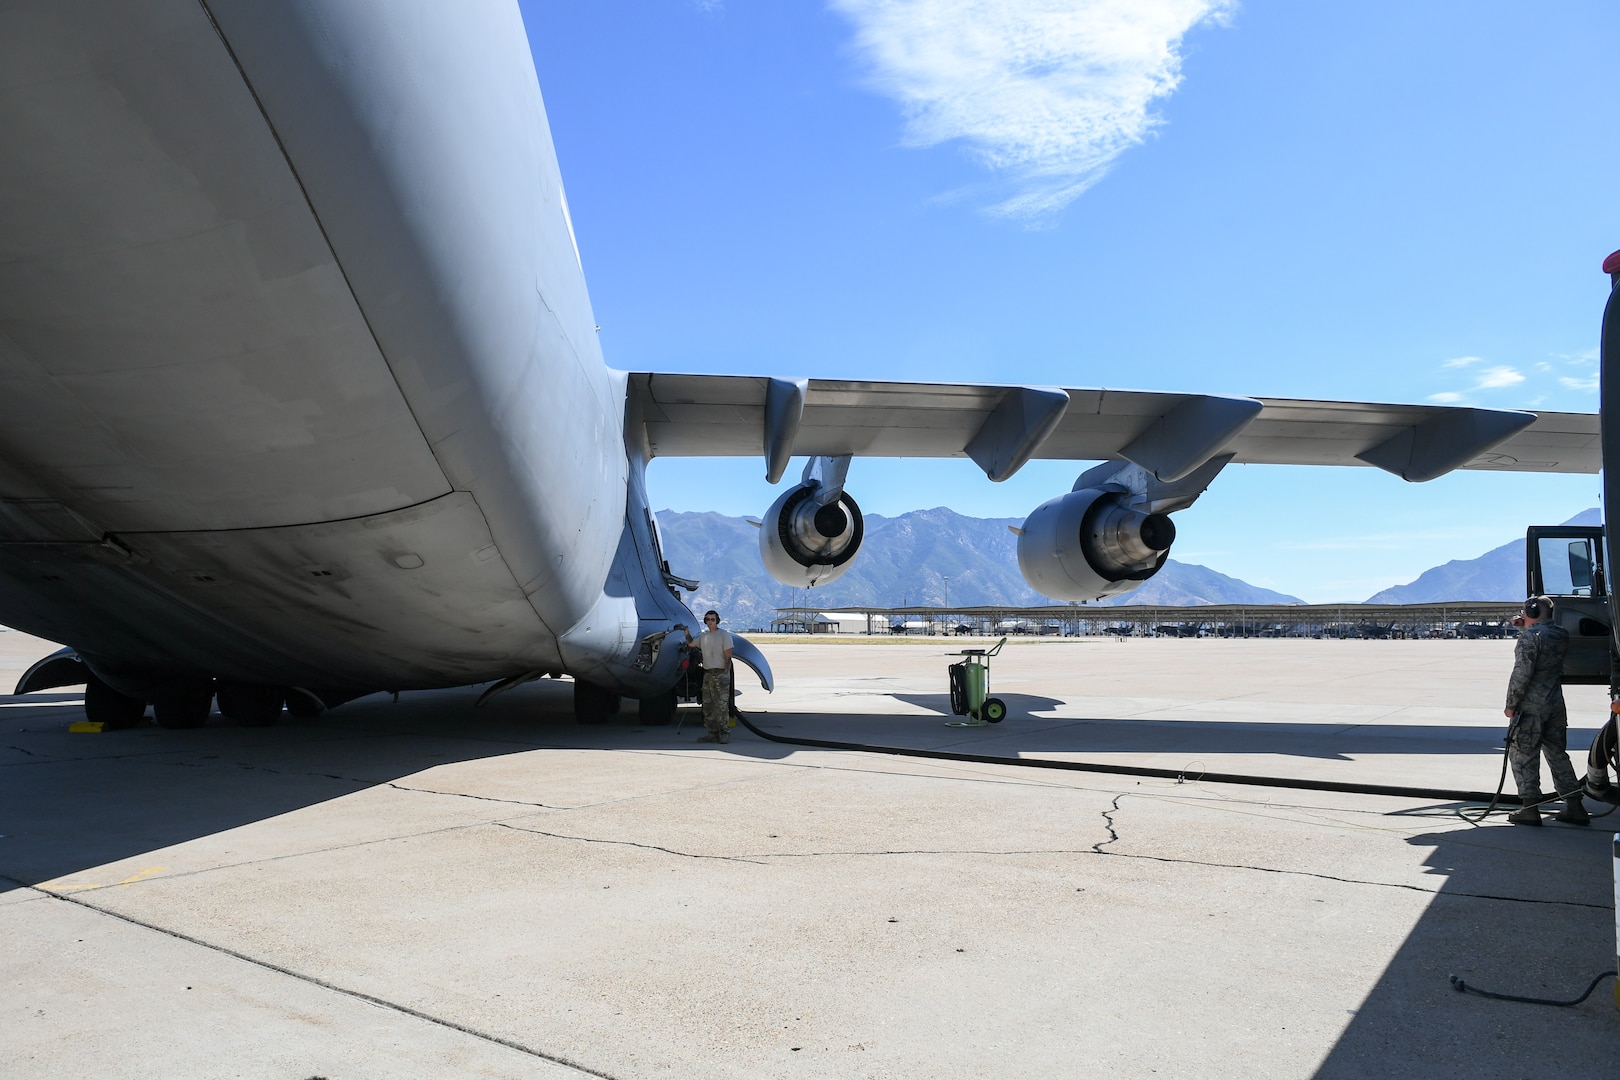 Crew Chief Tech. Sgt. Ronnie Calloway, 75th Logistics Readiness Squadron, fuels up a  C-17 Globemaster III at Hill Air Force Base, Utah, Aug. 9, 2019. The C-17 is attached to the Reserve 89th Airlift Squadron assigned to the 445th Aircraft Wing out of Wright-Patterson AFB, Ohio. (U.S. Air Force photo by Cynthia Griggs)